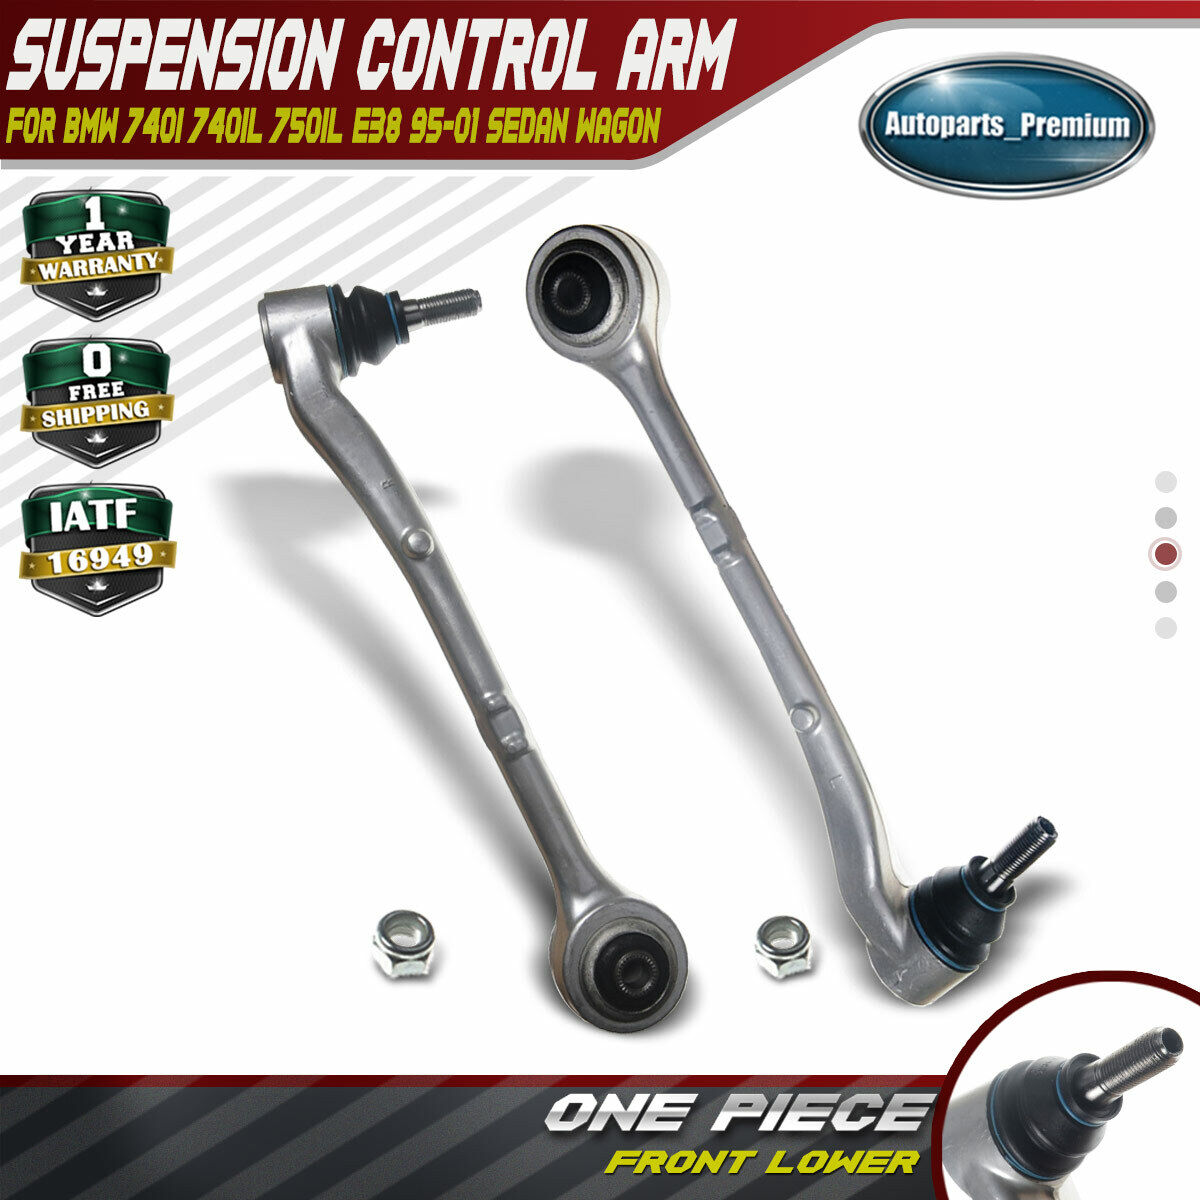 2x Lower Control Arms Front Left & Right for BMW E38 740i 740iL 750iL 1995-2001